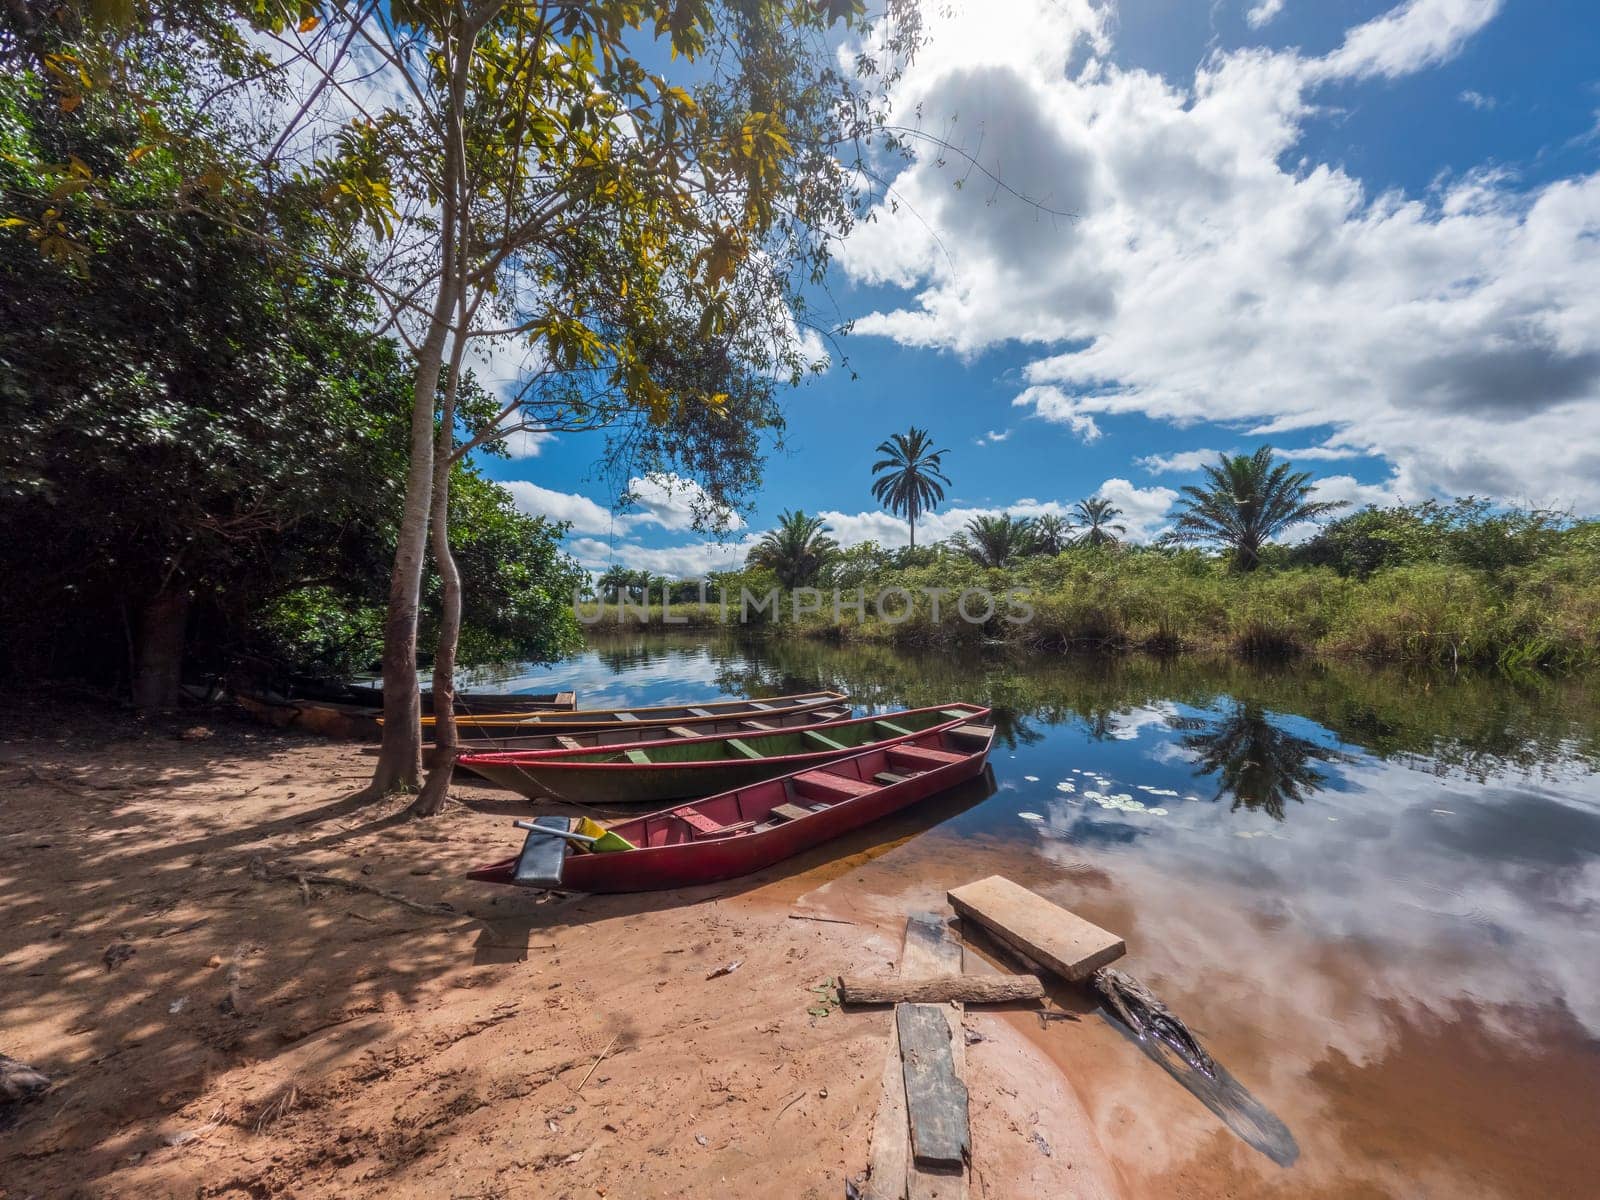 Canoes by a river with tropical plants under a blue sky.